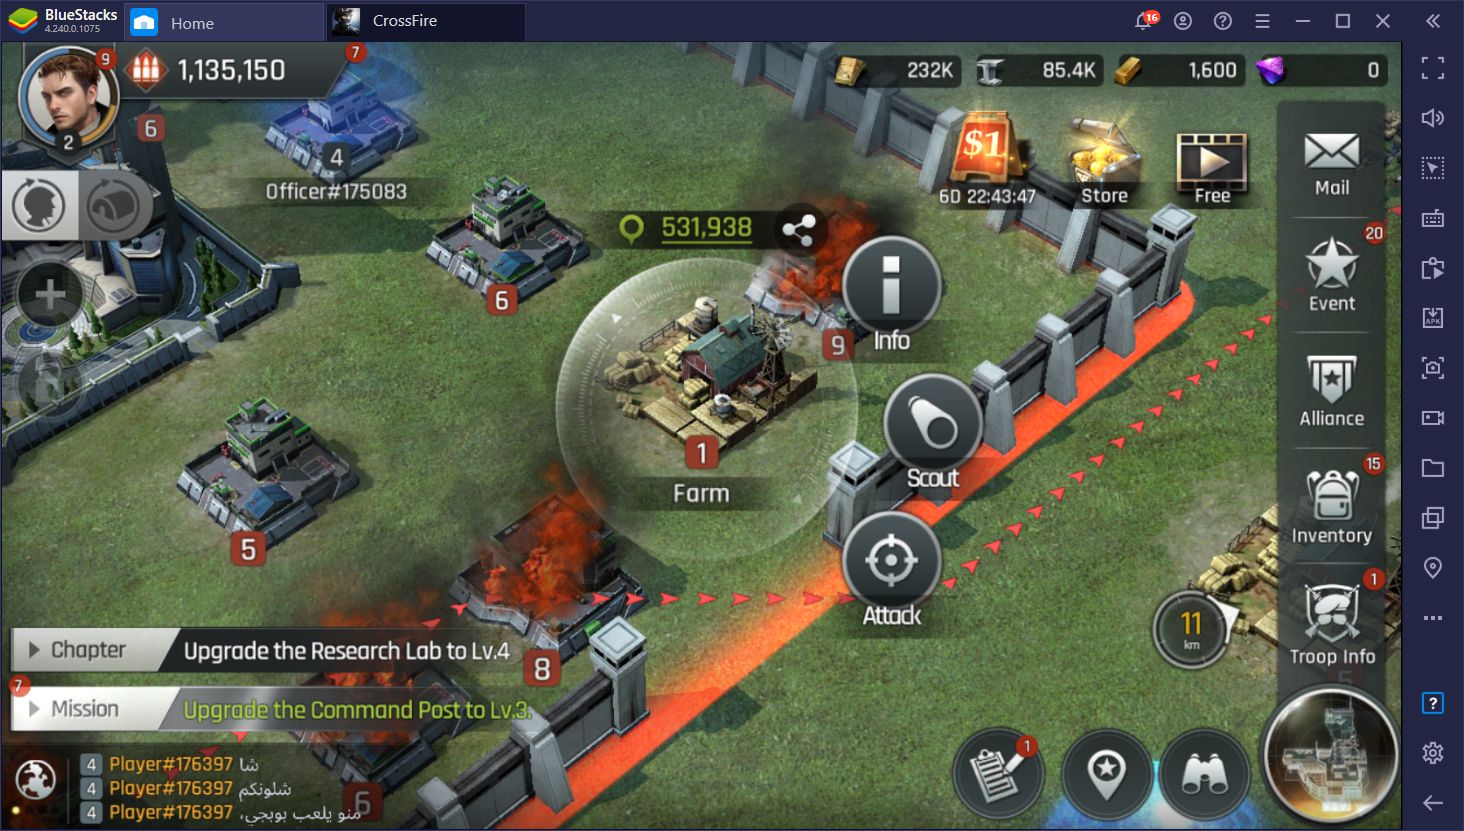 Crossfire: Warzone - Installing and Playing This Mobile Strategy Game on PC With BlueStacks